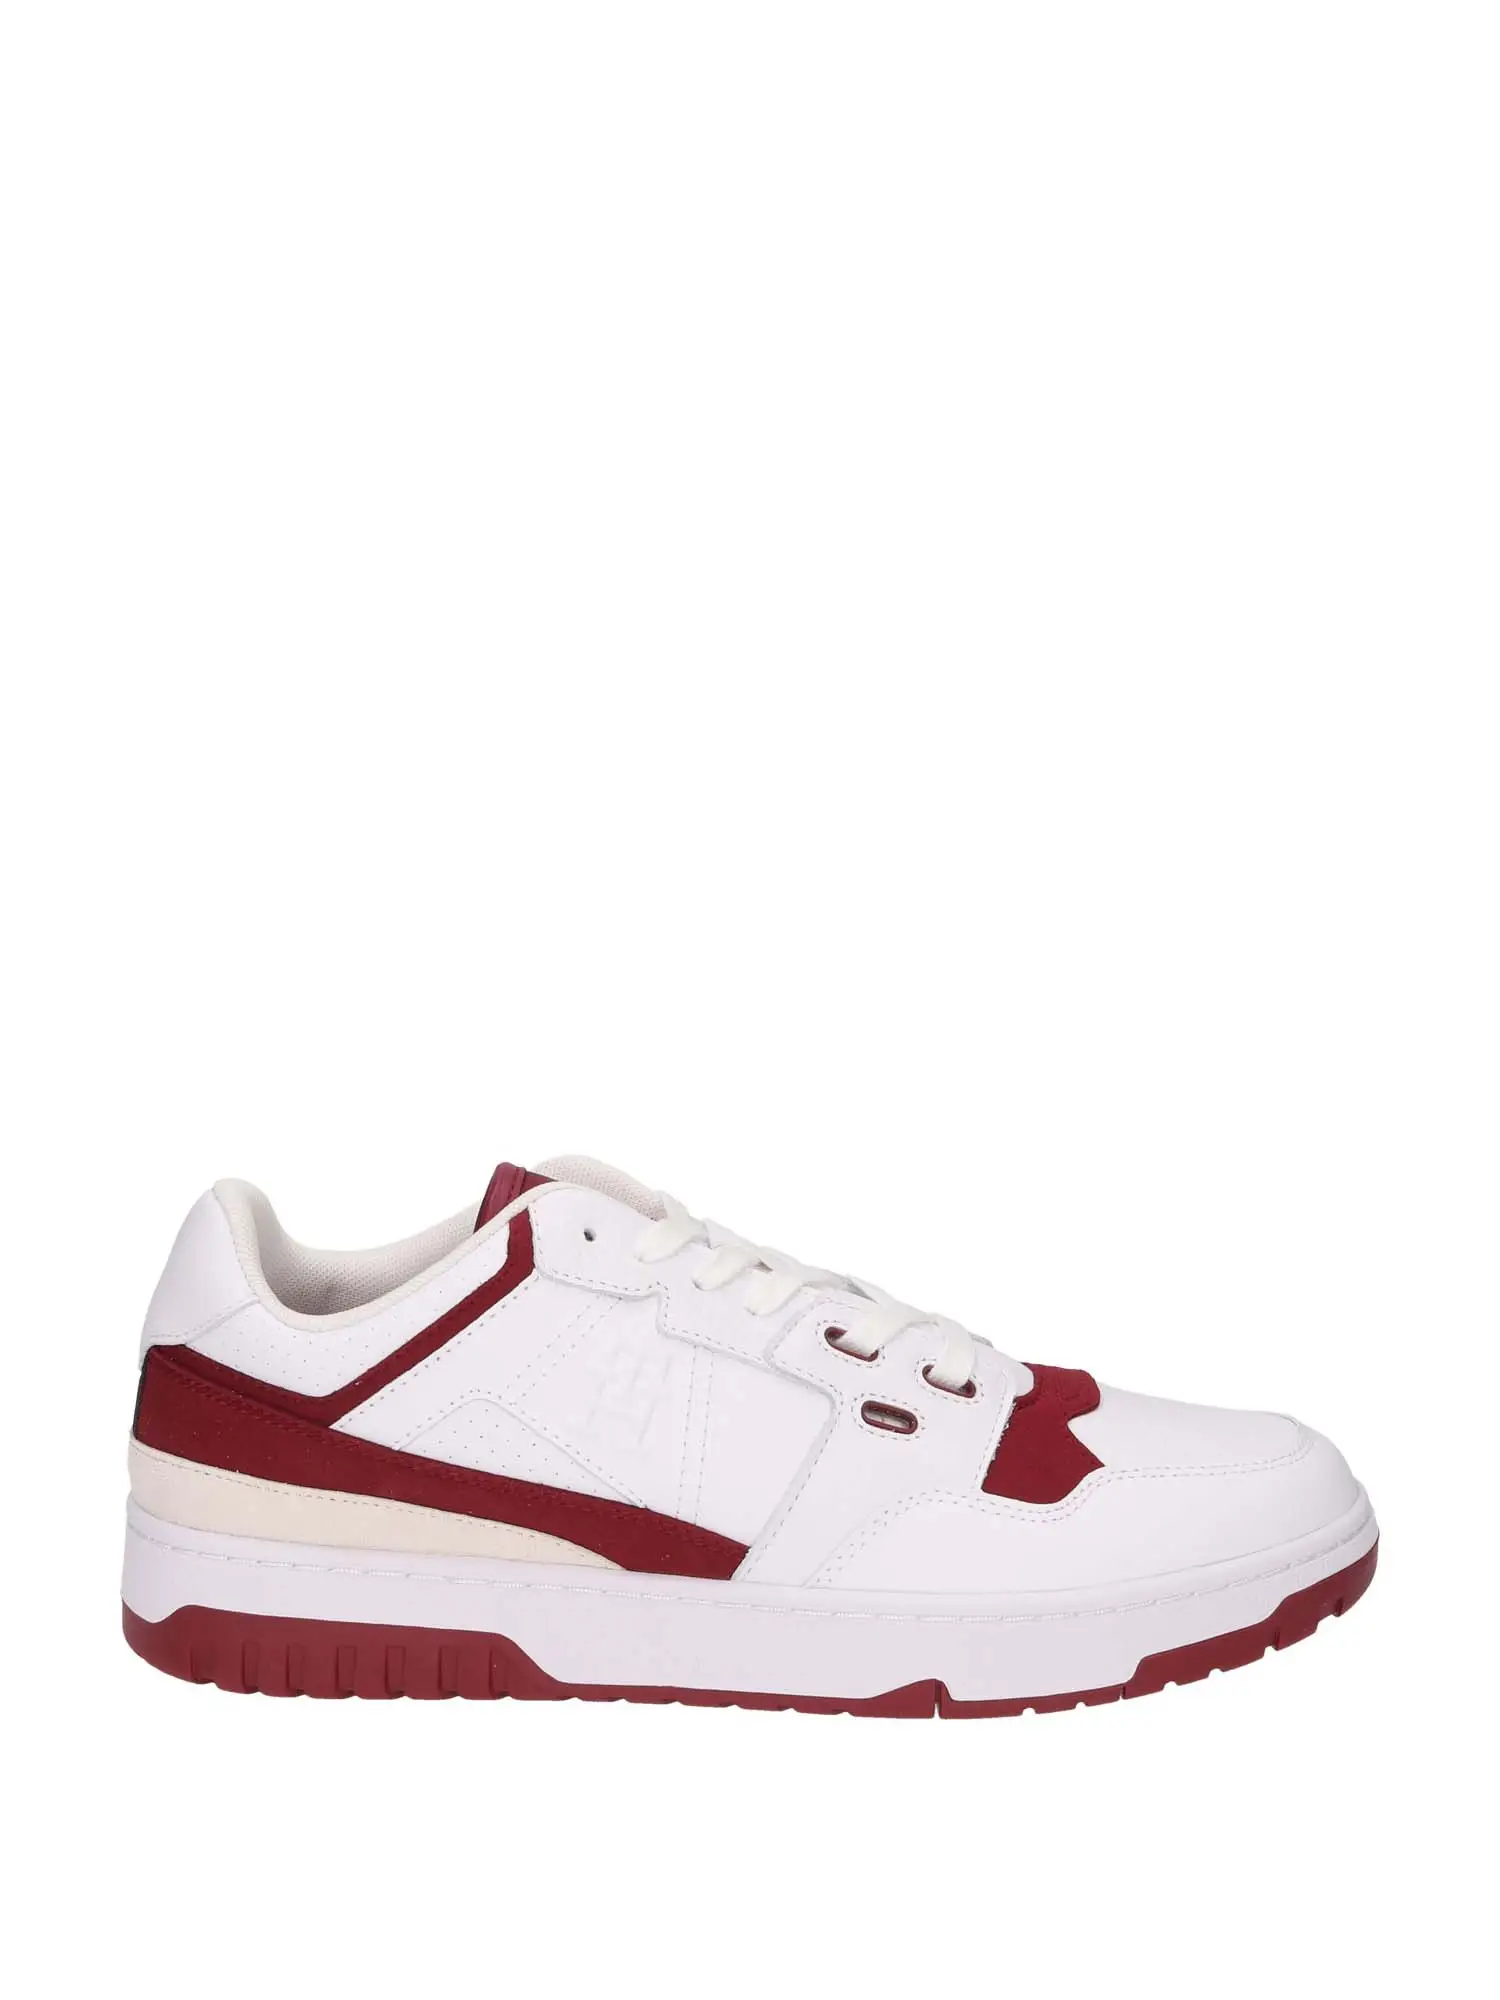 SNEAKERS UOMO - TOMMY HILFIGER - FM0FM04874 - ROSSO, 41